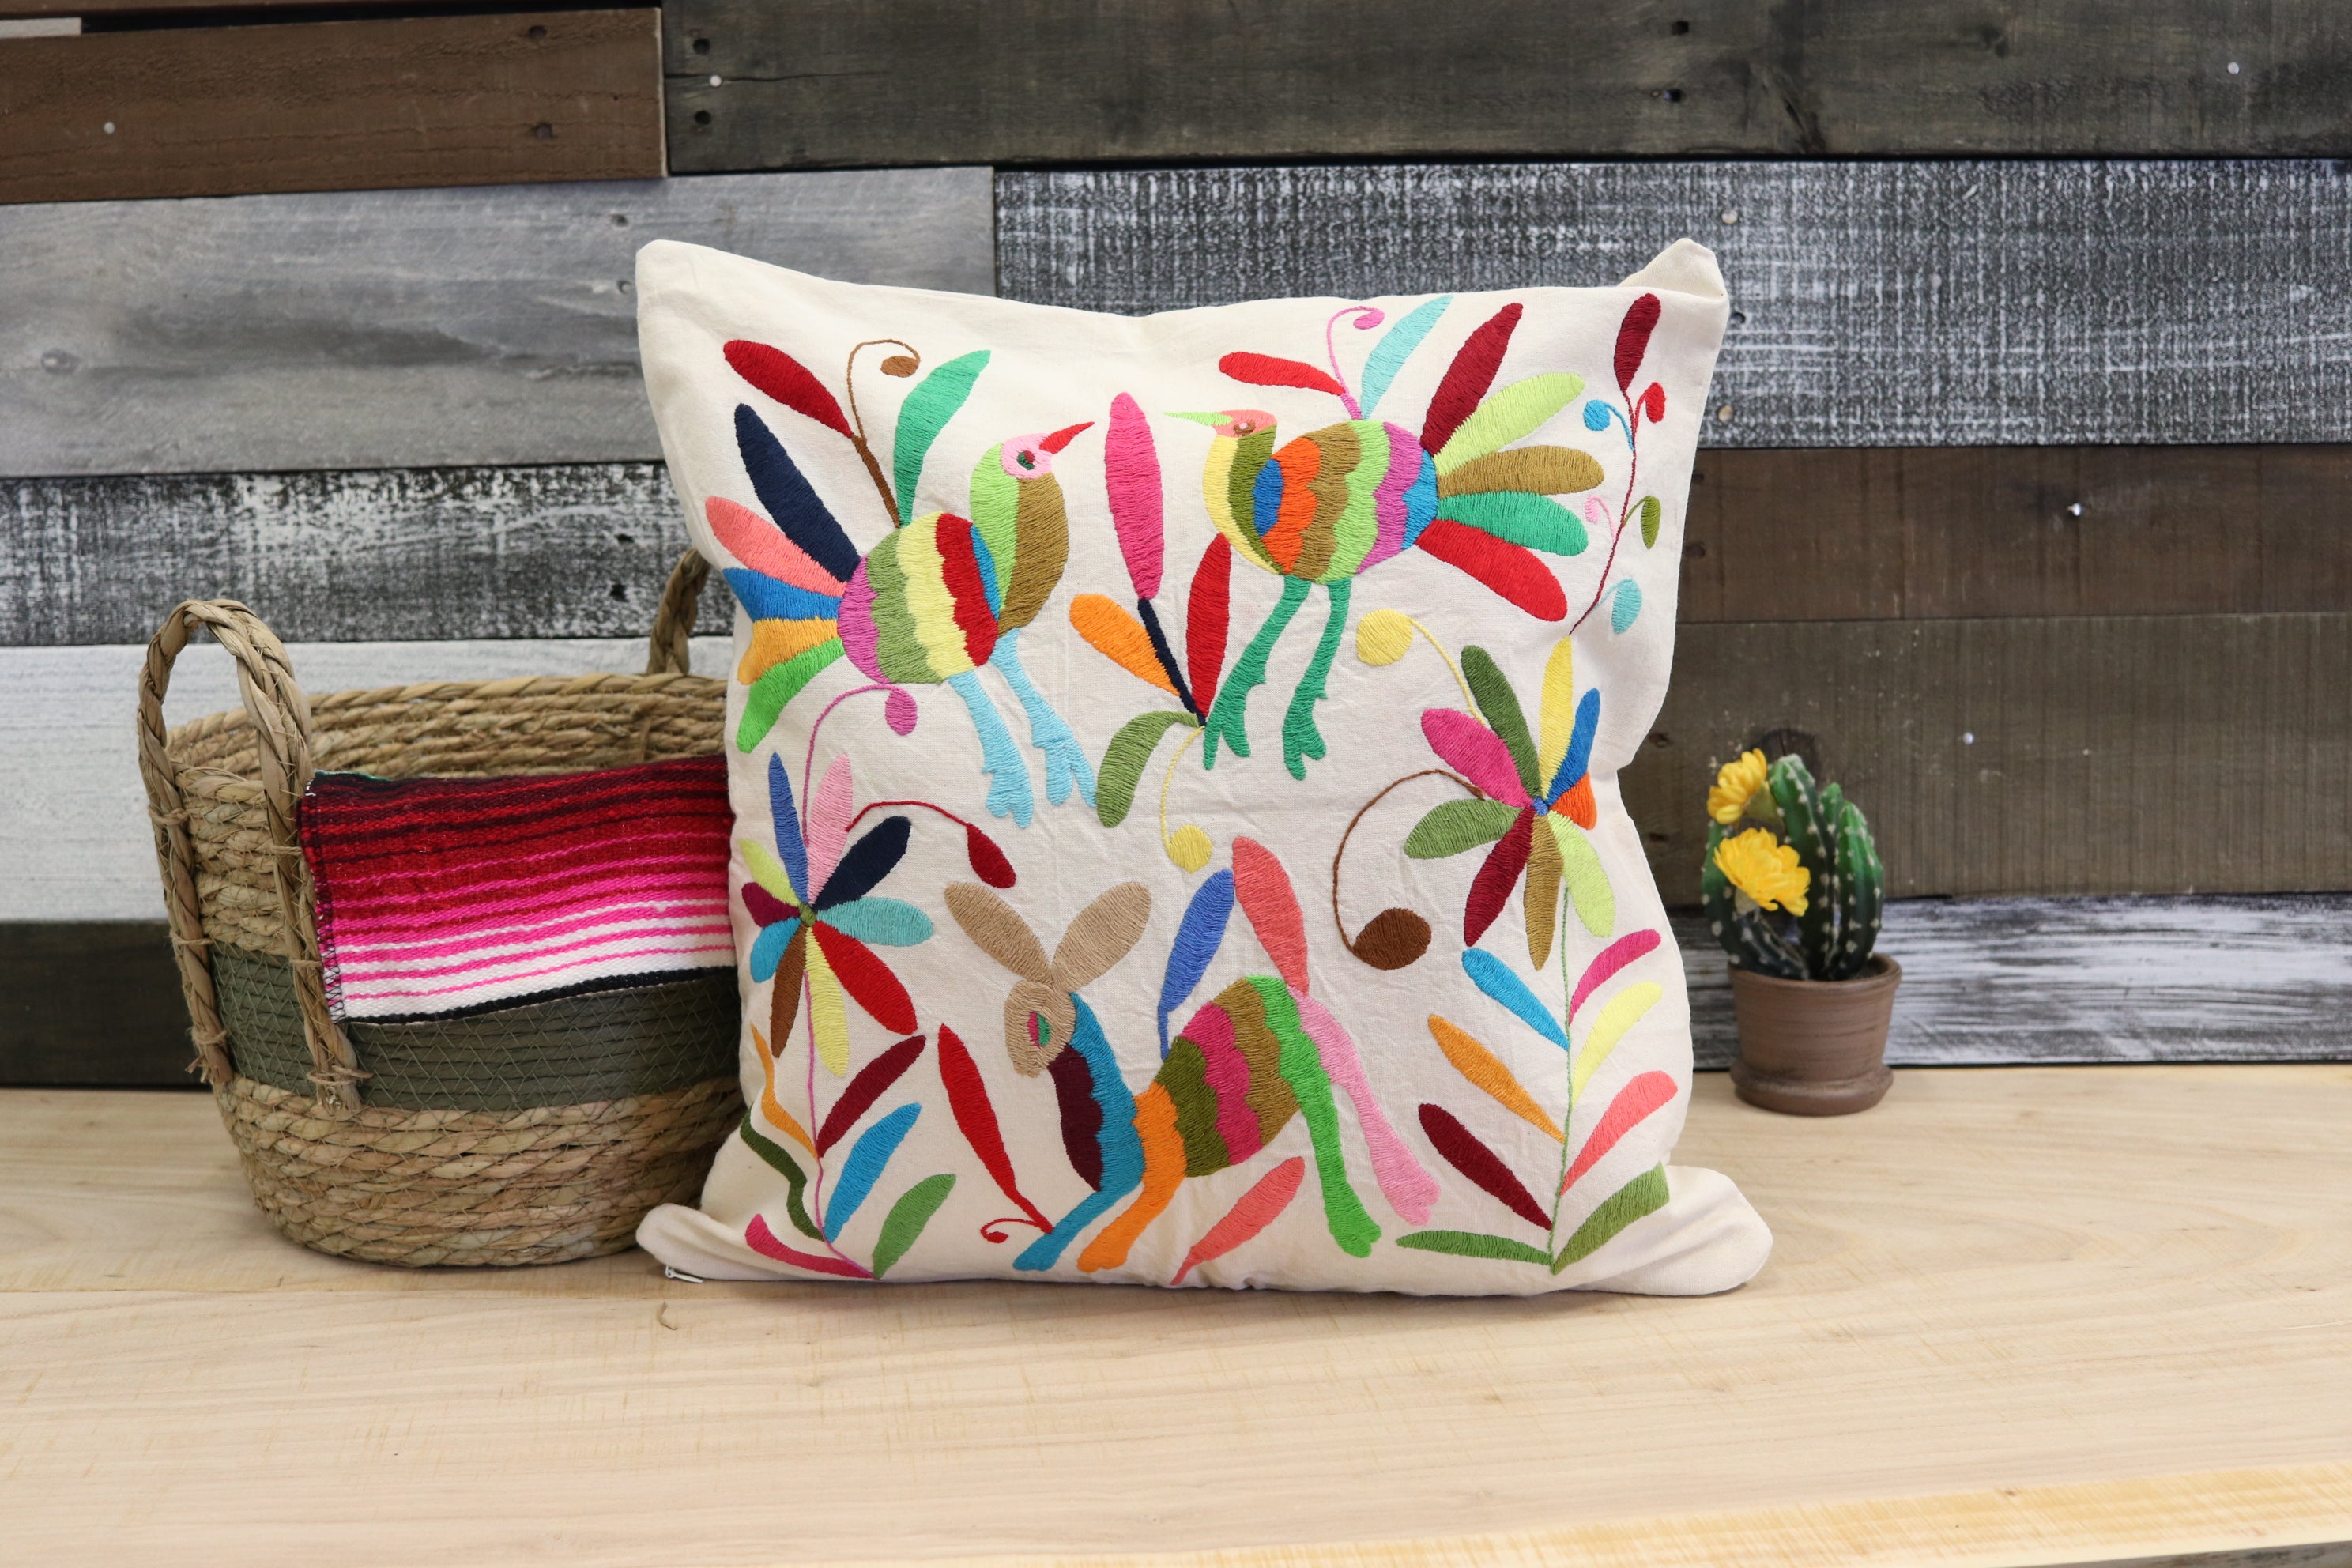 Square Otomi Tenango Pillow Cover with Hand Embroidered Animal, Bird and Flower Design in Vibrant Colors. Handmade in Mexico. Ships from the USA. Buy now at www.felipeandgrace.com.